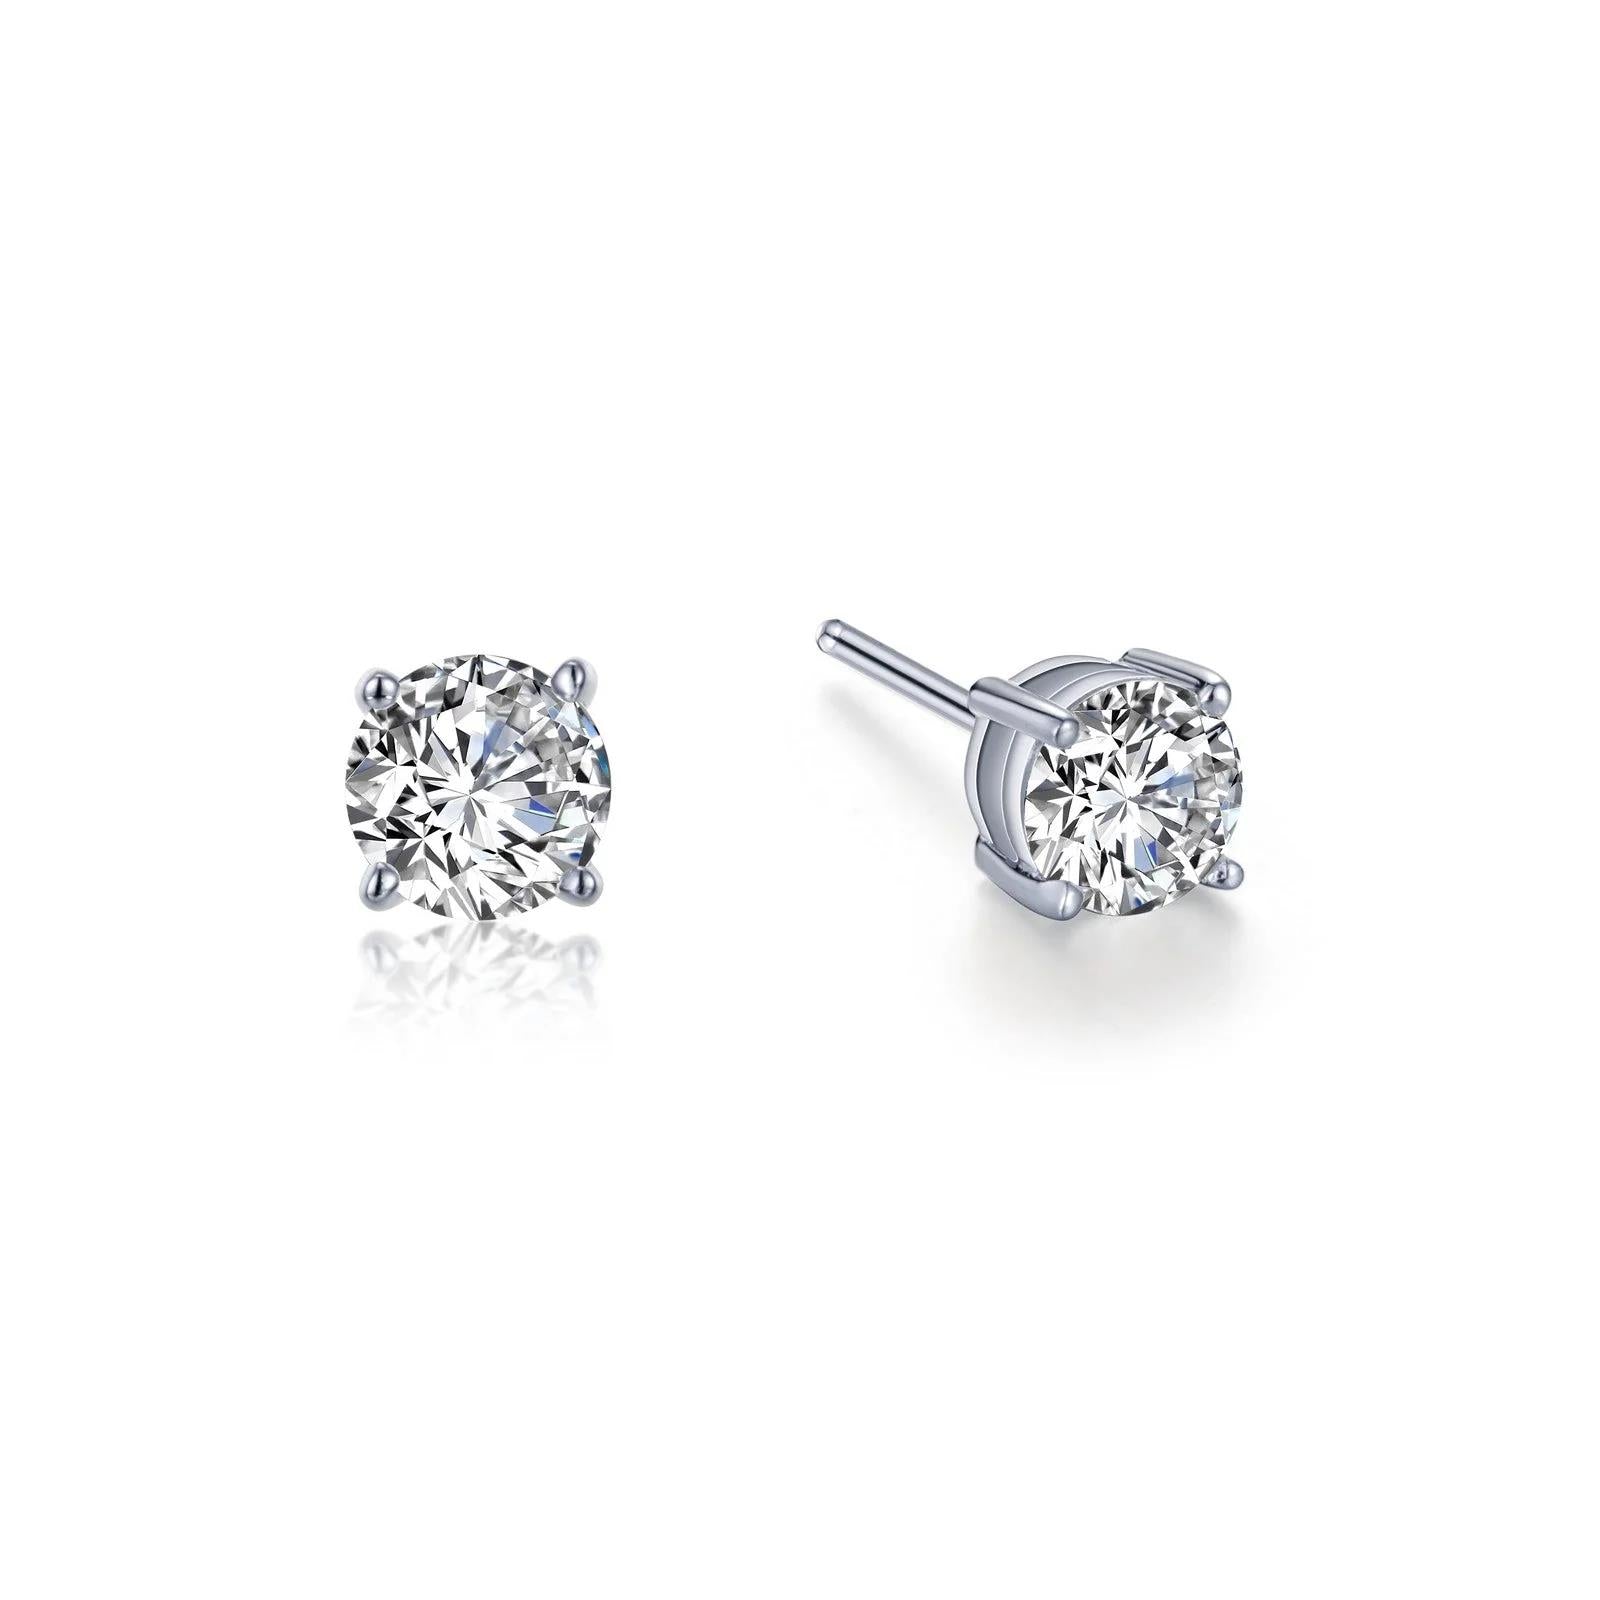 Simulated Solitaire Stud Earrings